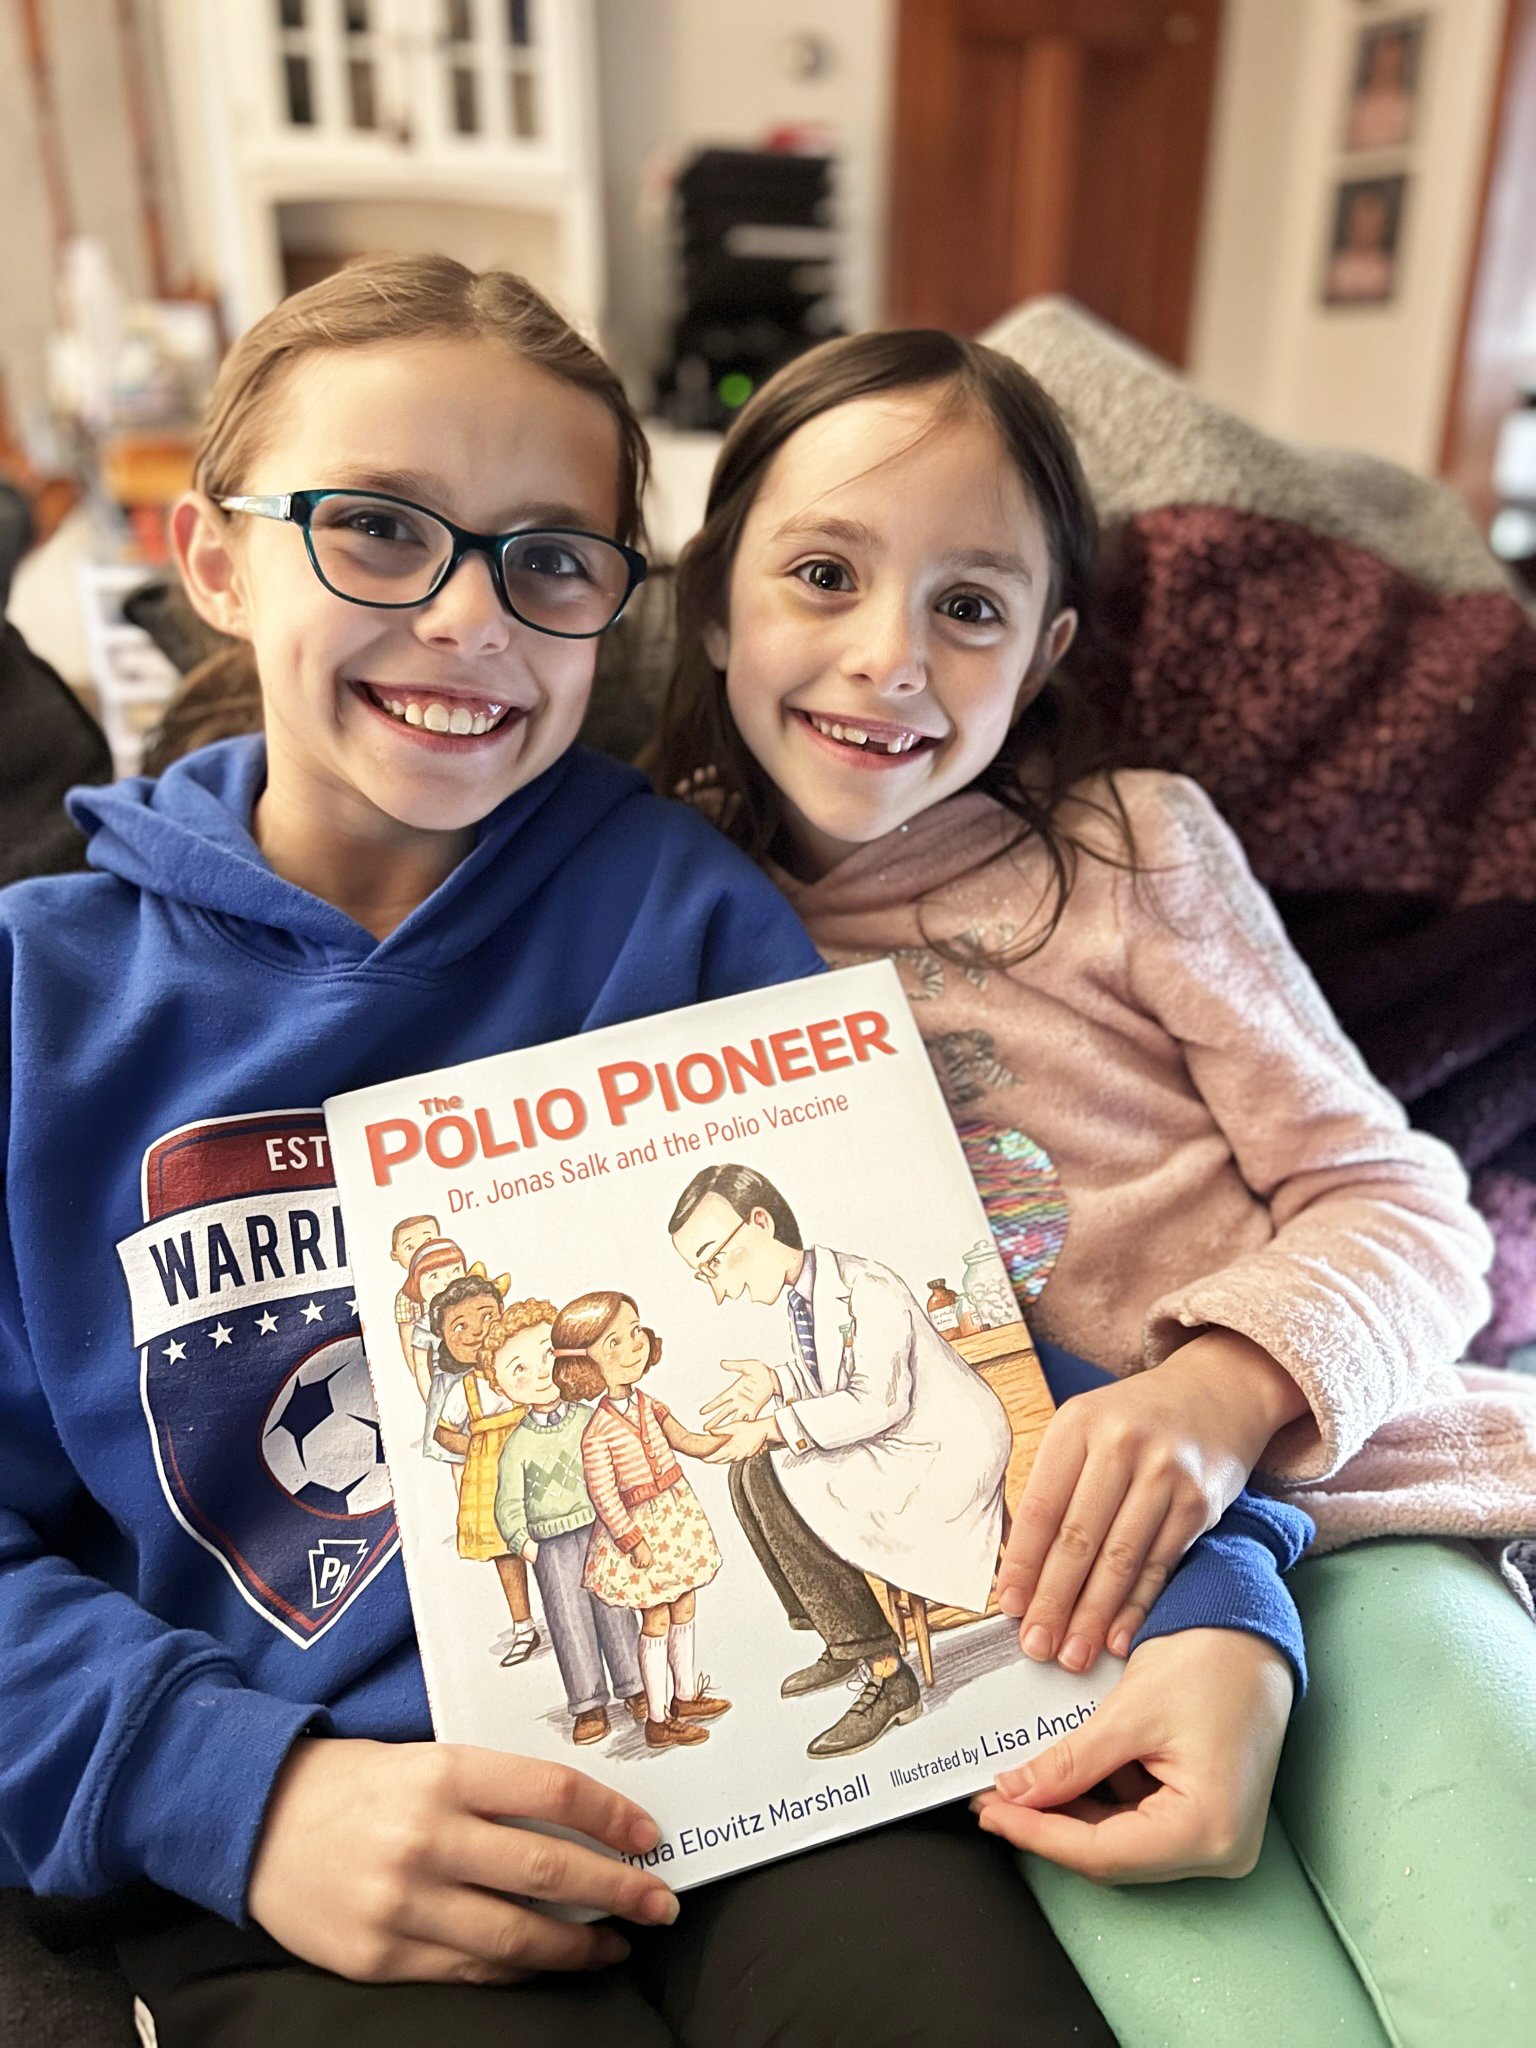  The Polio Pioneer - A children's book reviewed by Avery and Ariana (2023) Read it here:  https://www.polionetwork.org/archive/pzovoenx7bdmdauq9uytwv94u4yjug  